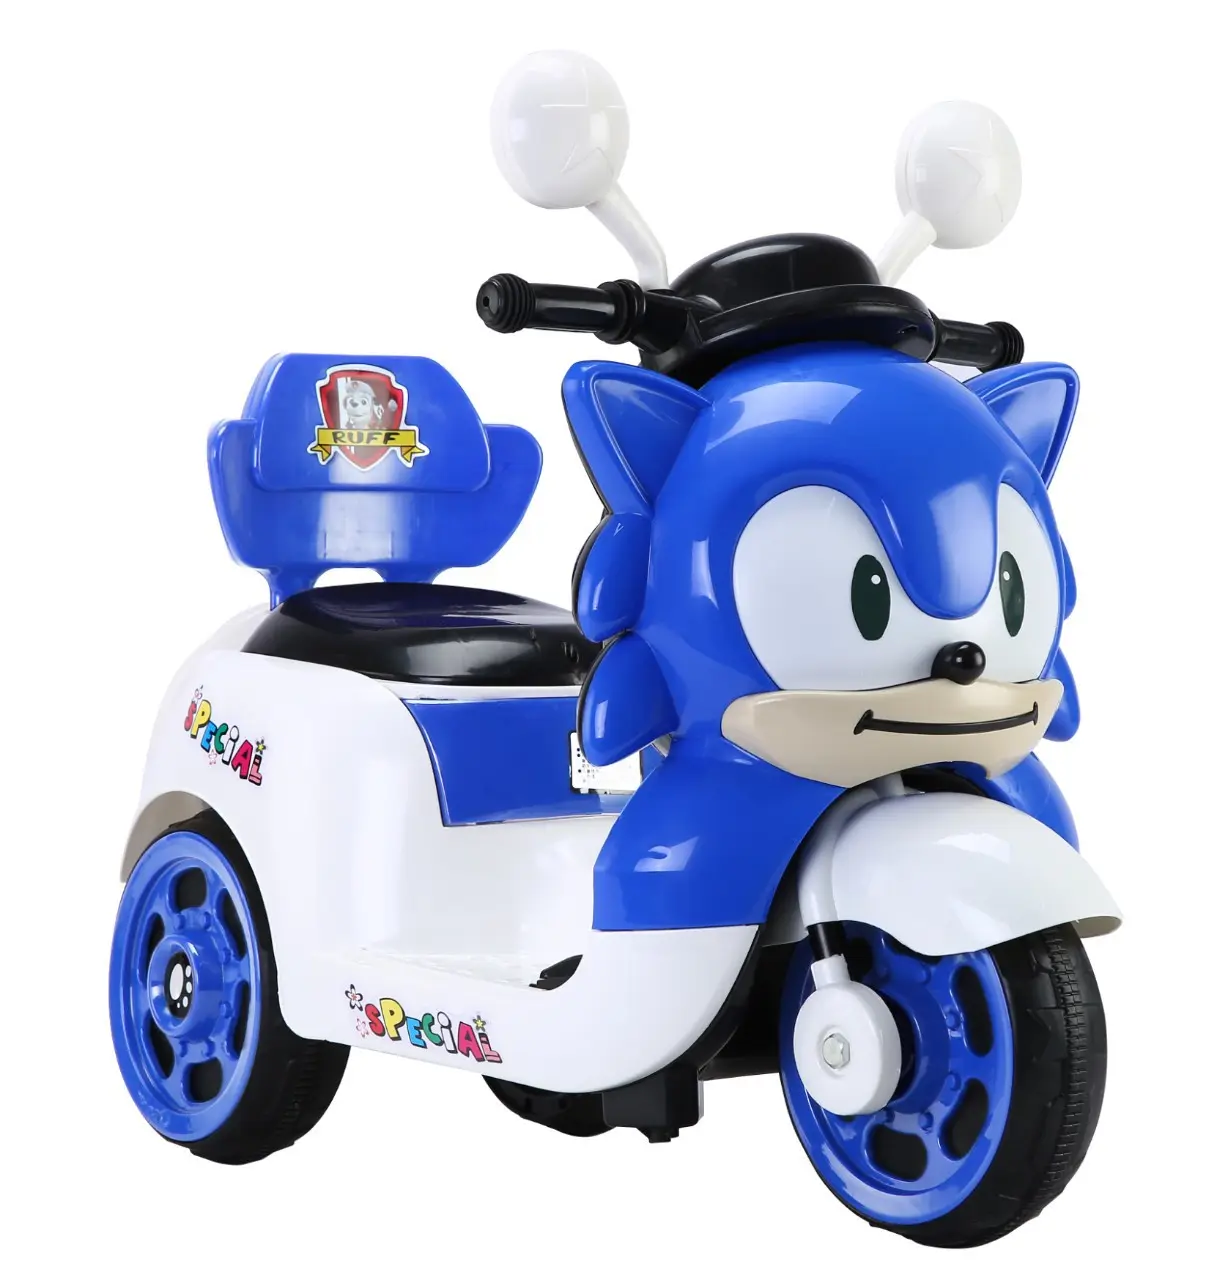 High quality plastic wheel kids electric motorcycles for 3-8 years old children